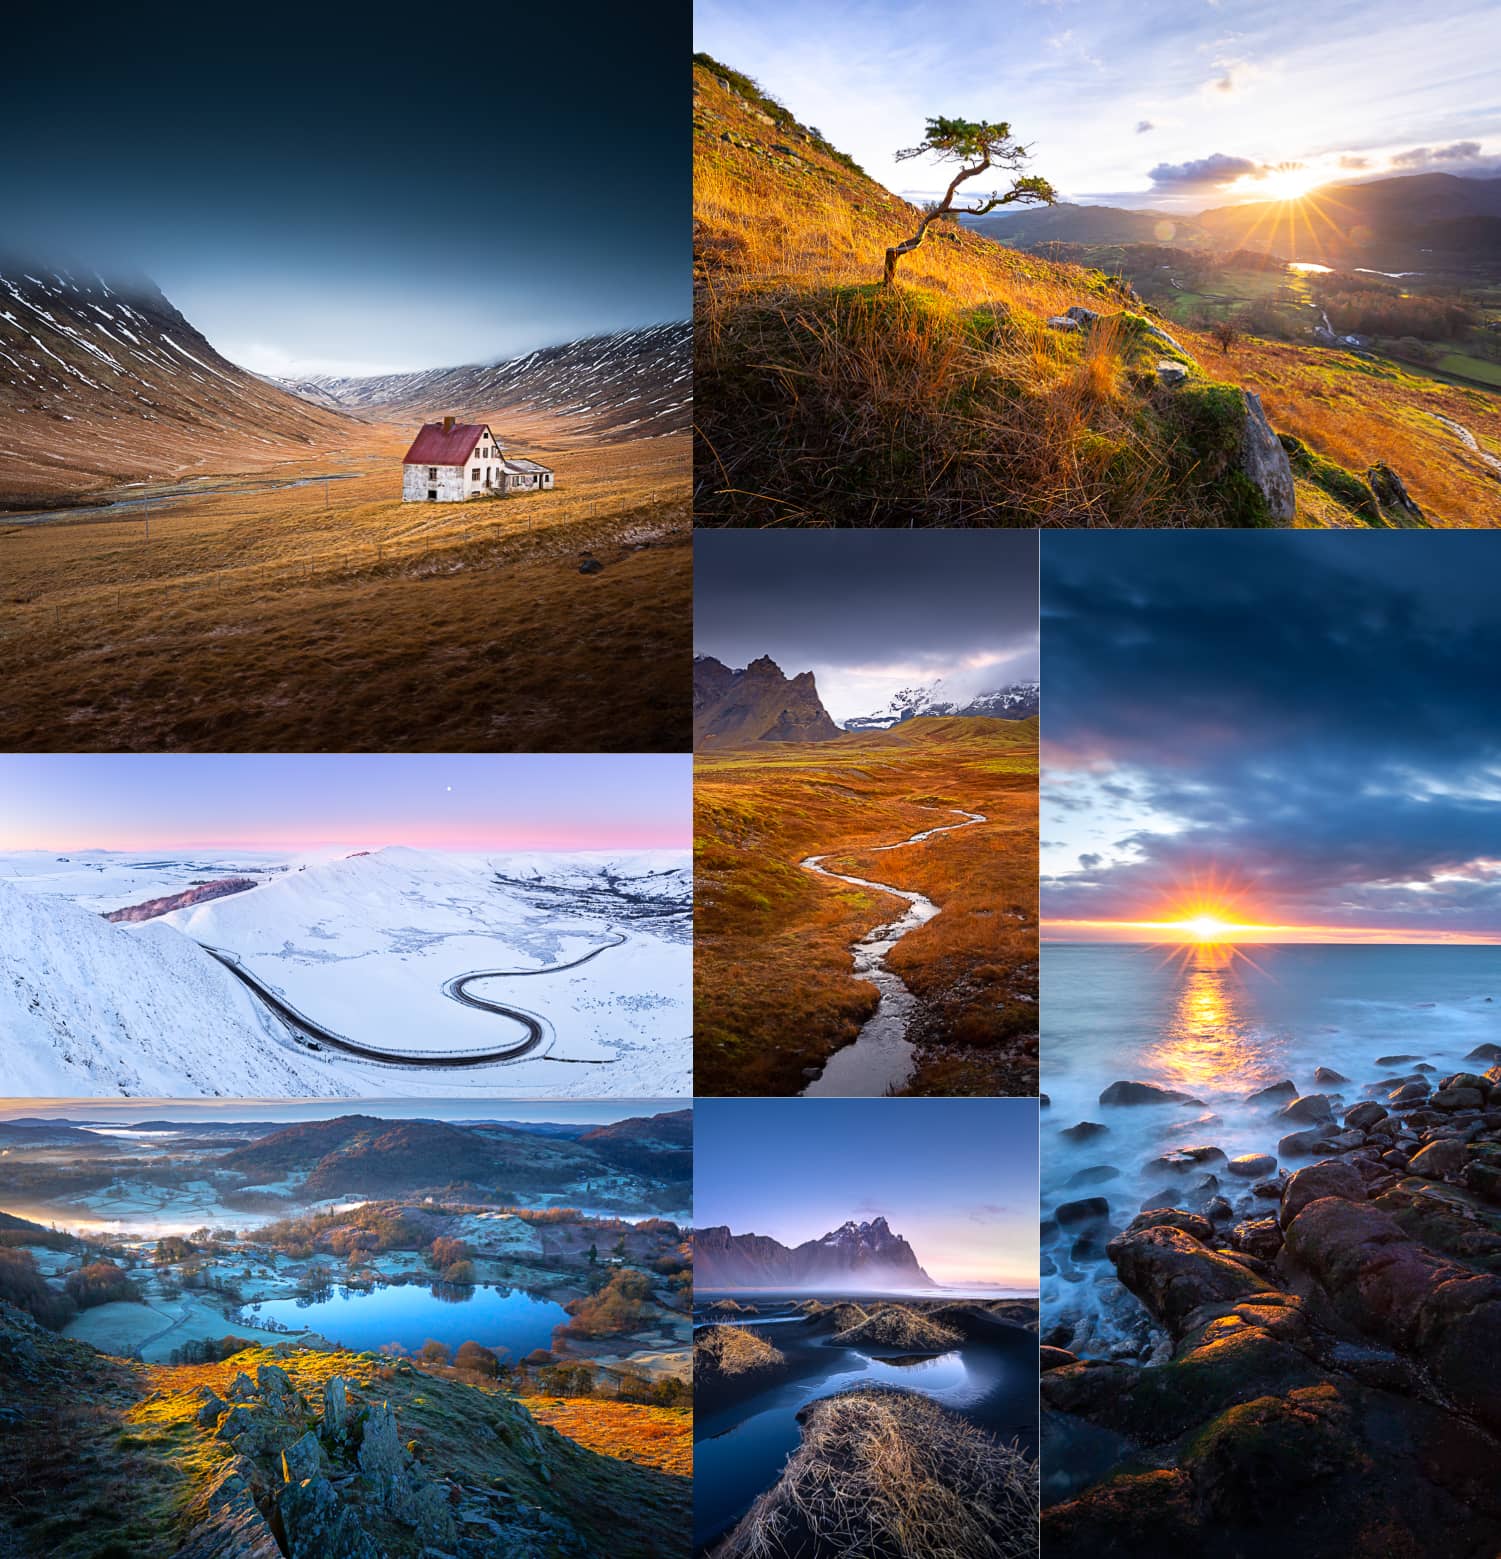 Landscape photography from 4 months on the road